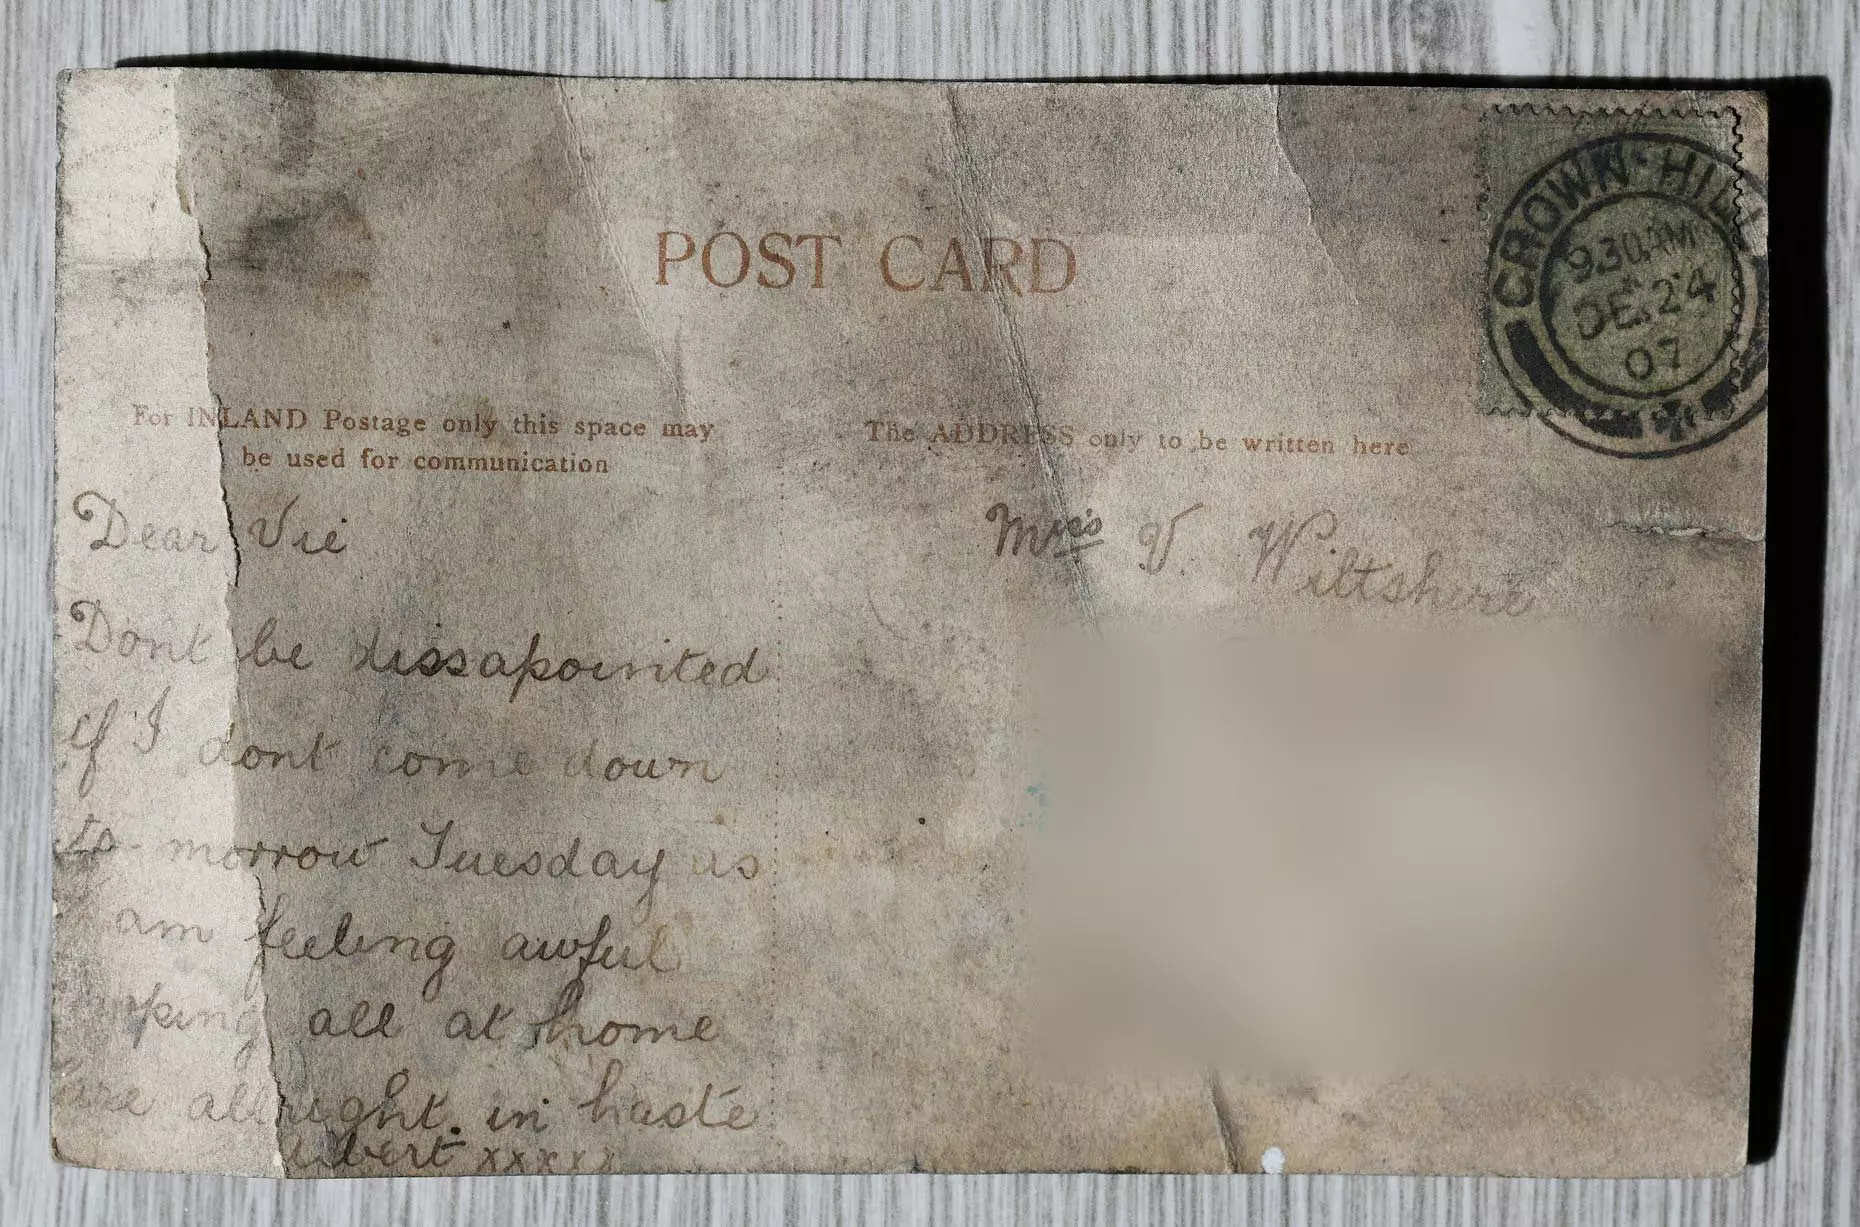 The postcard was addressed to a 'Miss Wiltshire'.